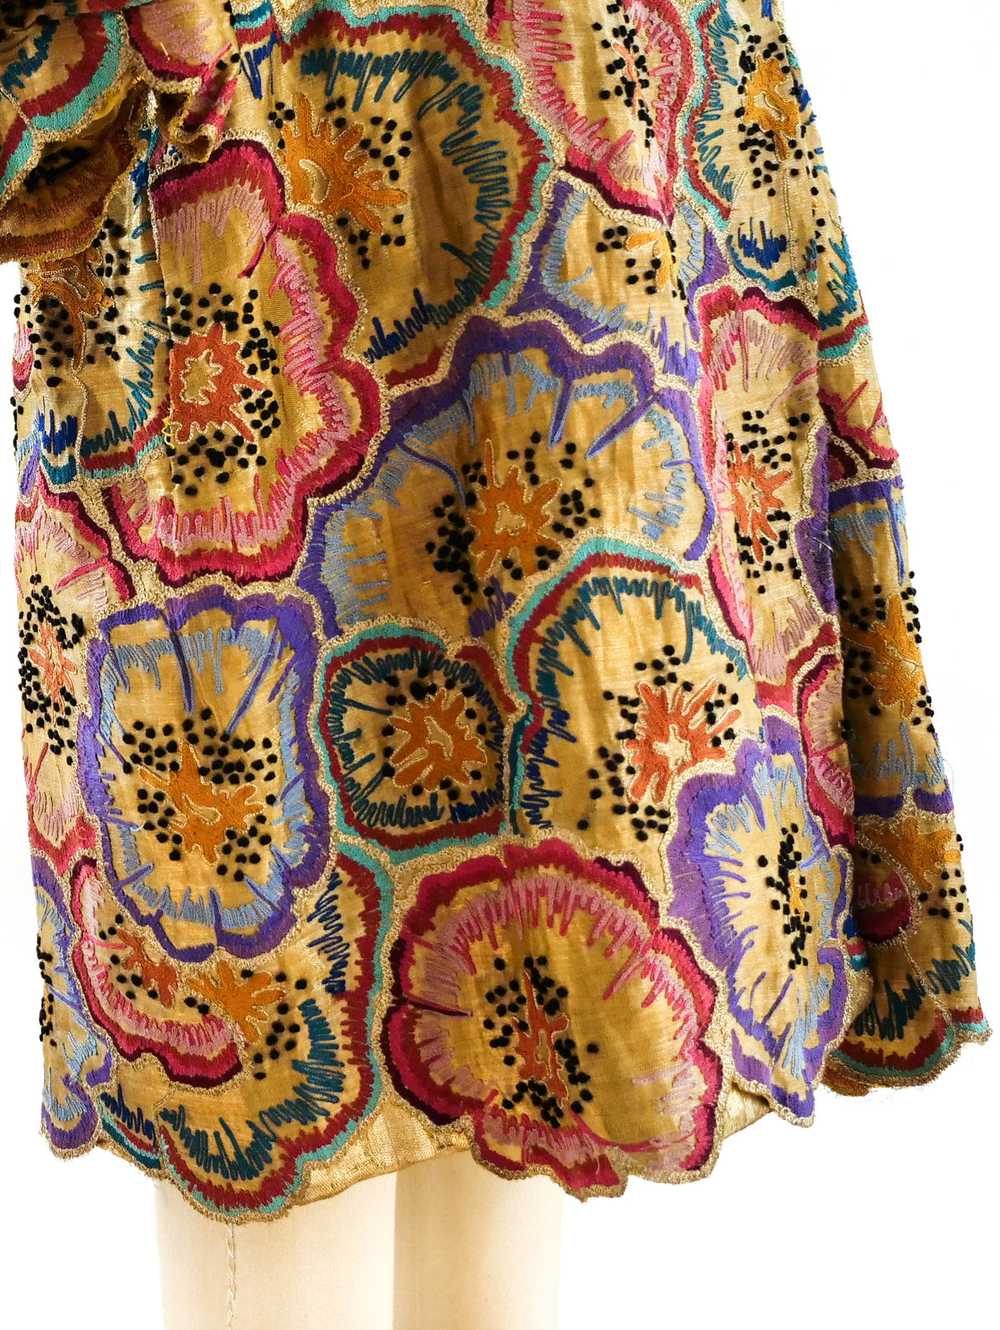 1920's Gold Lame Opera Coat with Floral Embroidery - image 9